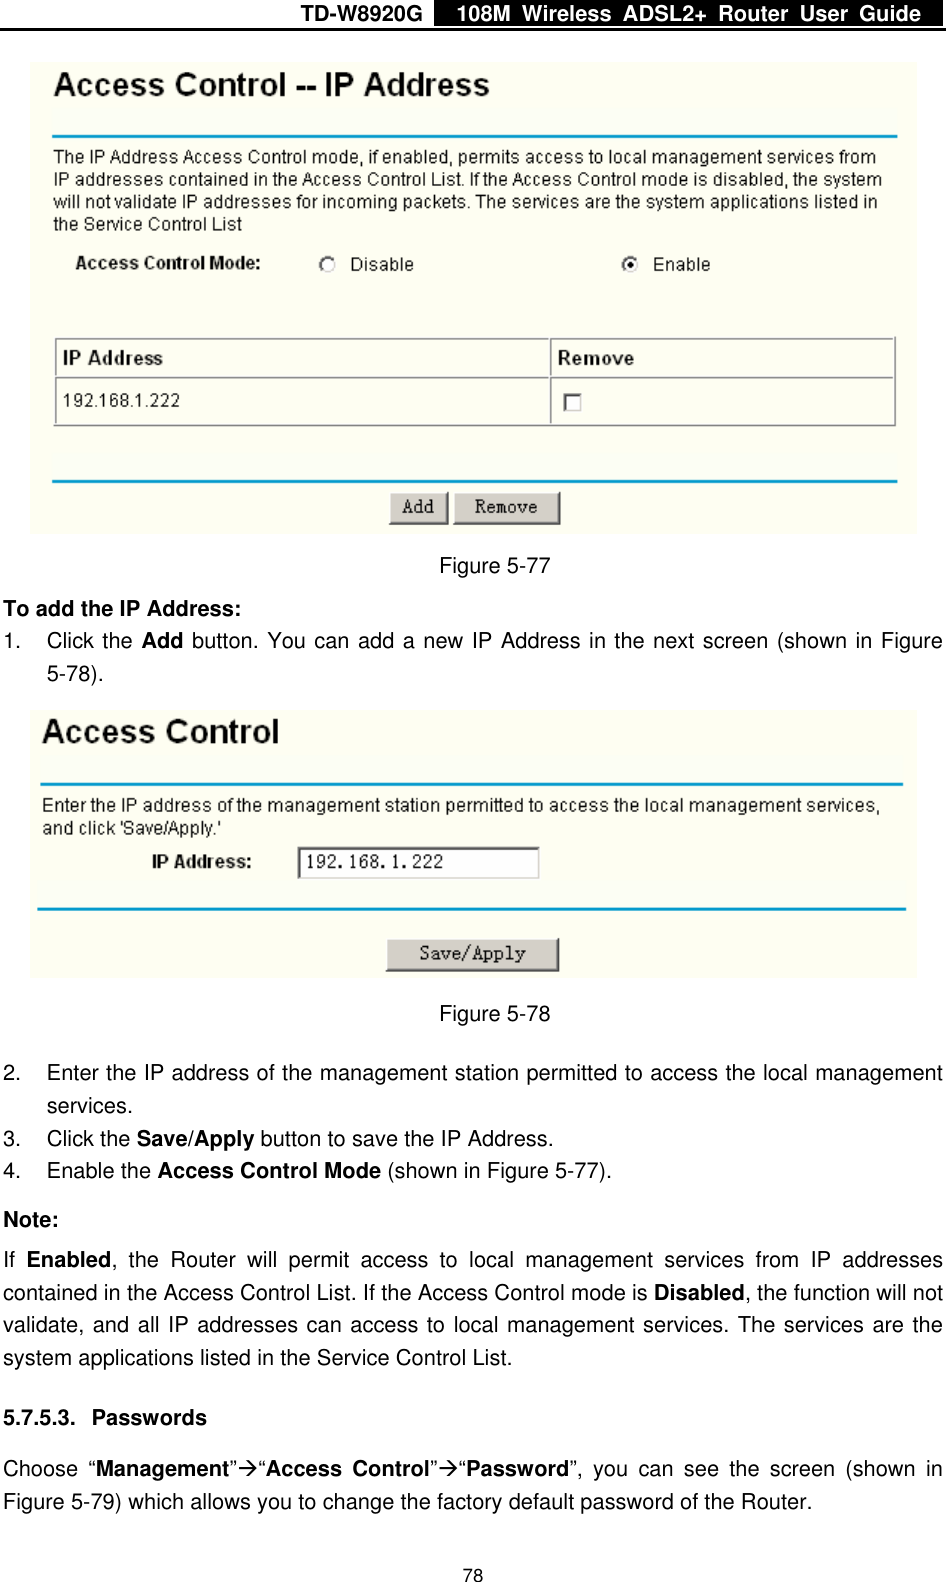 TD-W8920G    108M Wireless ADSL2+ Router User Guide    78 Figure 5-77 To add the IP Address: 1. Click the Add button. You can add a new IP Address in the next screen (shown in Figure 5-78).  Figure 5-78 2.  Enter the IP address of the management station permitted to access the local management services. 3. Click the Save/Apply button to save the IP Address. 4. Enable the Access Control Mode (shown in Figure 5-77). Note: If  Enabled, the Router will permit access to local management services from IP addresses contained in the Access Control List. If the Access Control mode is Disabled, the function will not validate, and all IP addresses can access to local management services. The services are the system applications listed in the Service Control List. 5.7.5.3. Passwords Choose “Management”Æ“Access Control”Æ“Password”, you can see the screen (shown in Figure 5-79) which allows you to change the factory default password of the Router. 